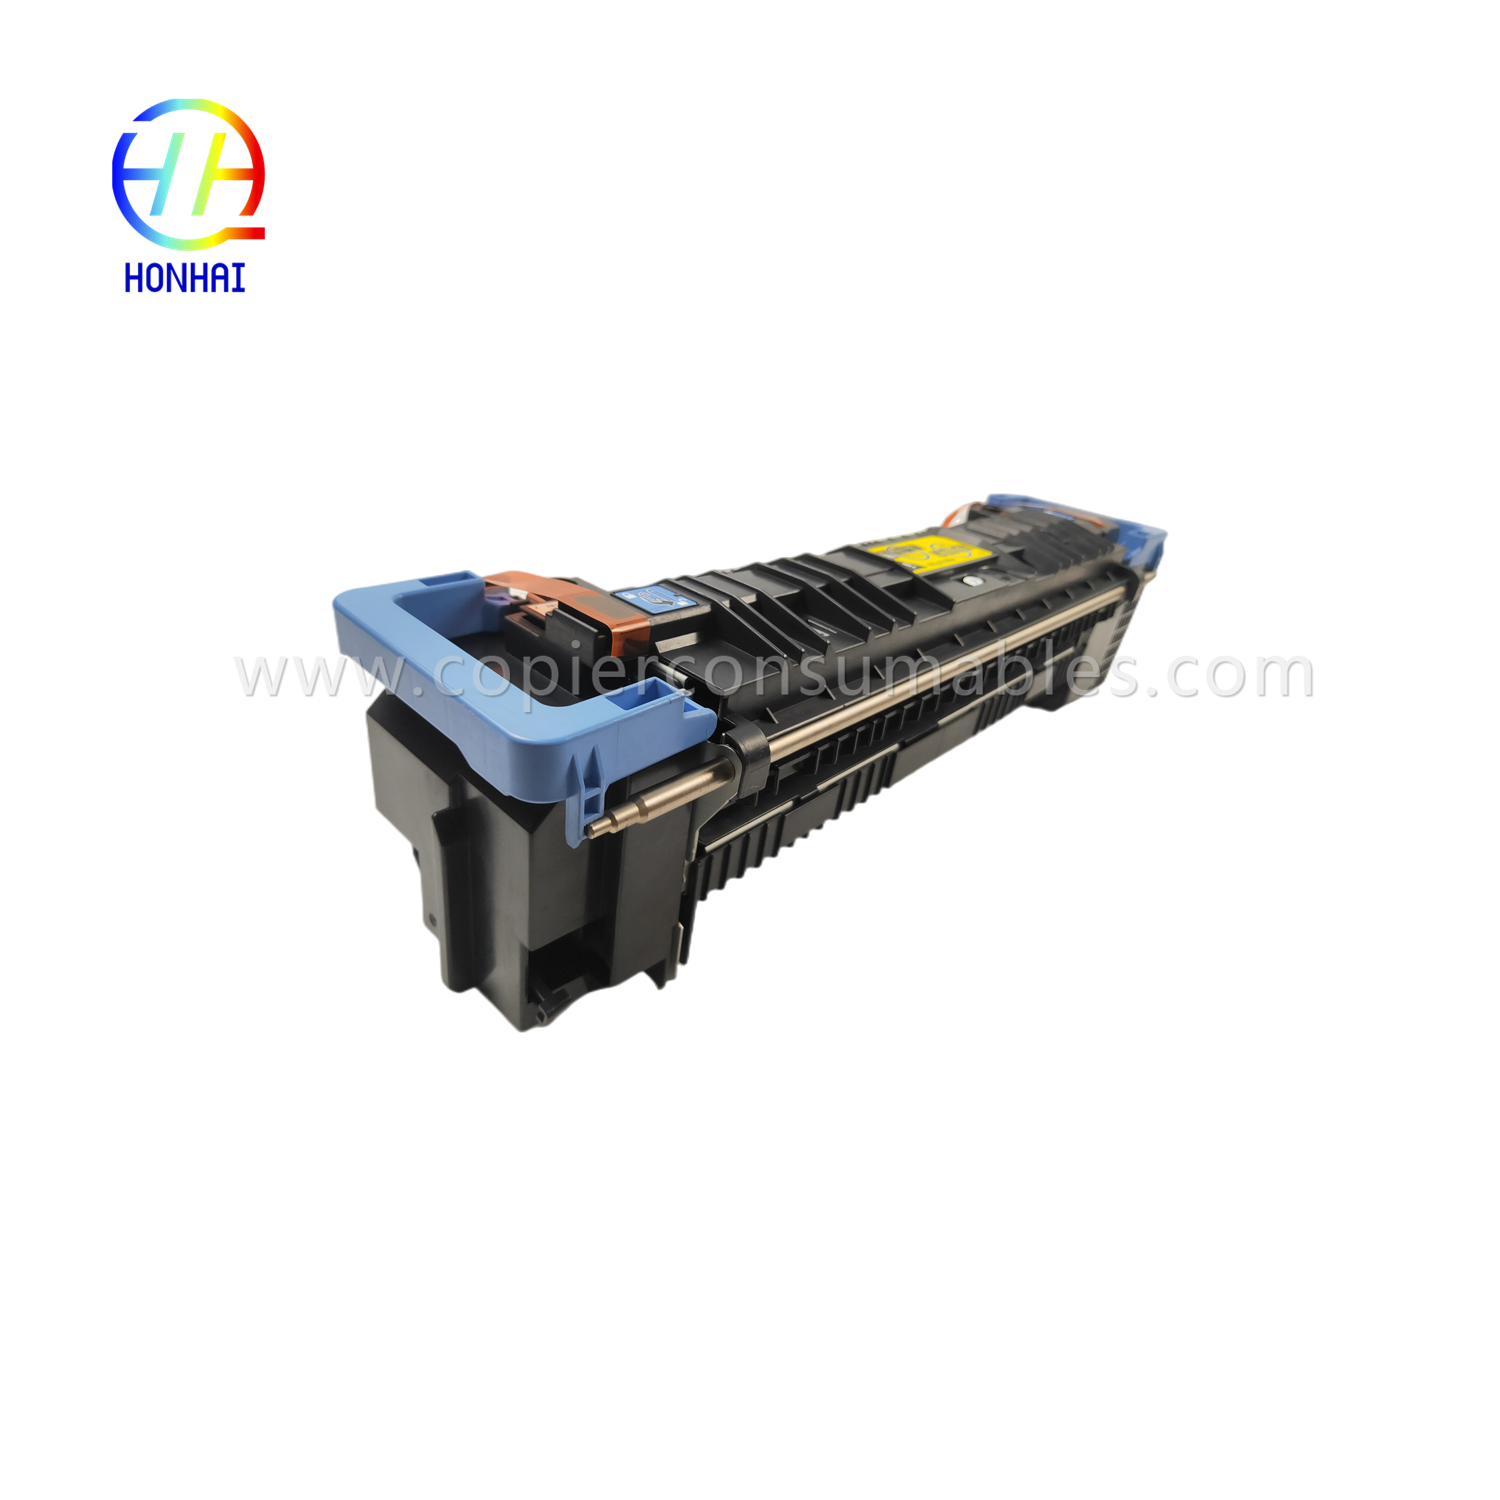 https://www.copierconsumables.com/fuser-assembly-unit-for-hp-m855-m880-m855dn-m855xh-m880z-m880z-c1n54-67901-c1n58-67901-fusing-heating-proxing/